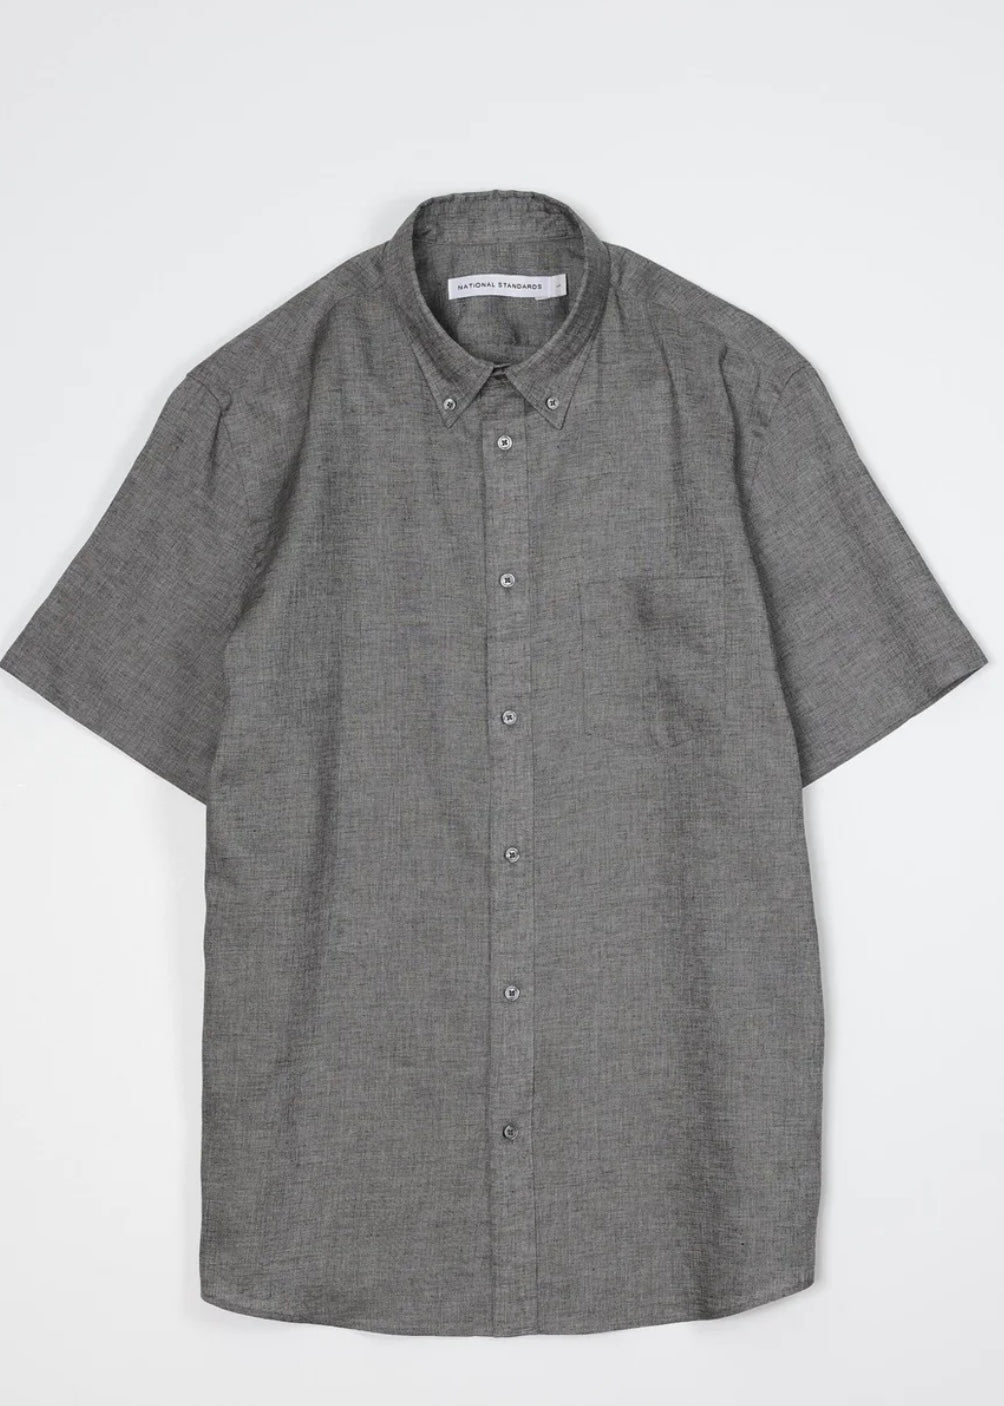 Japanese Easy Linen S/S Button Up Shirt